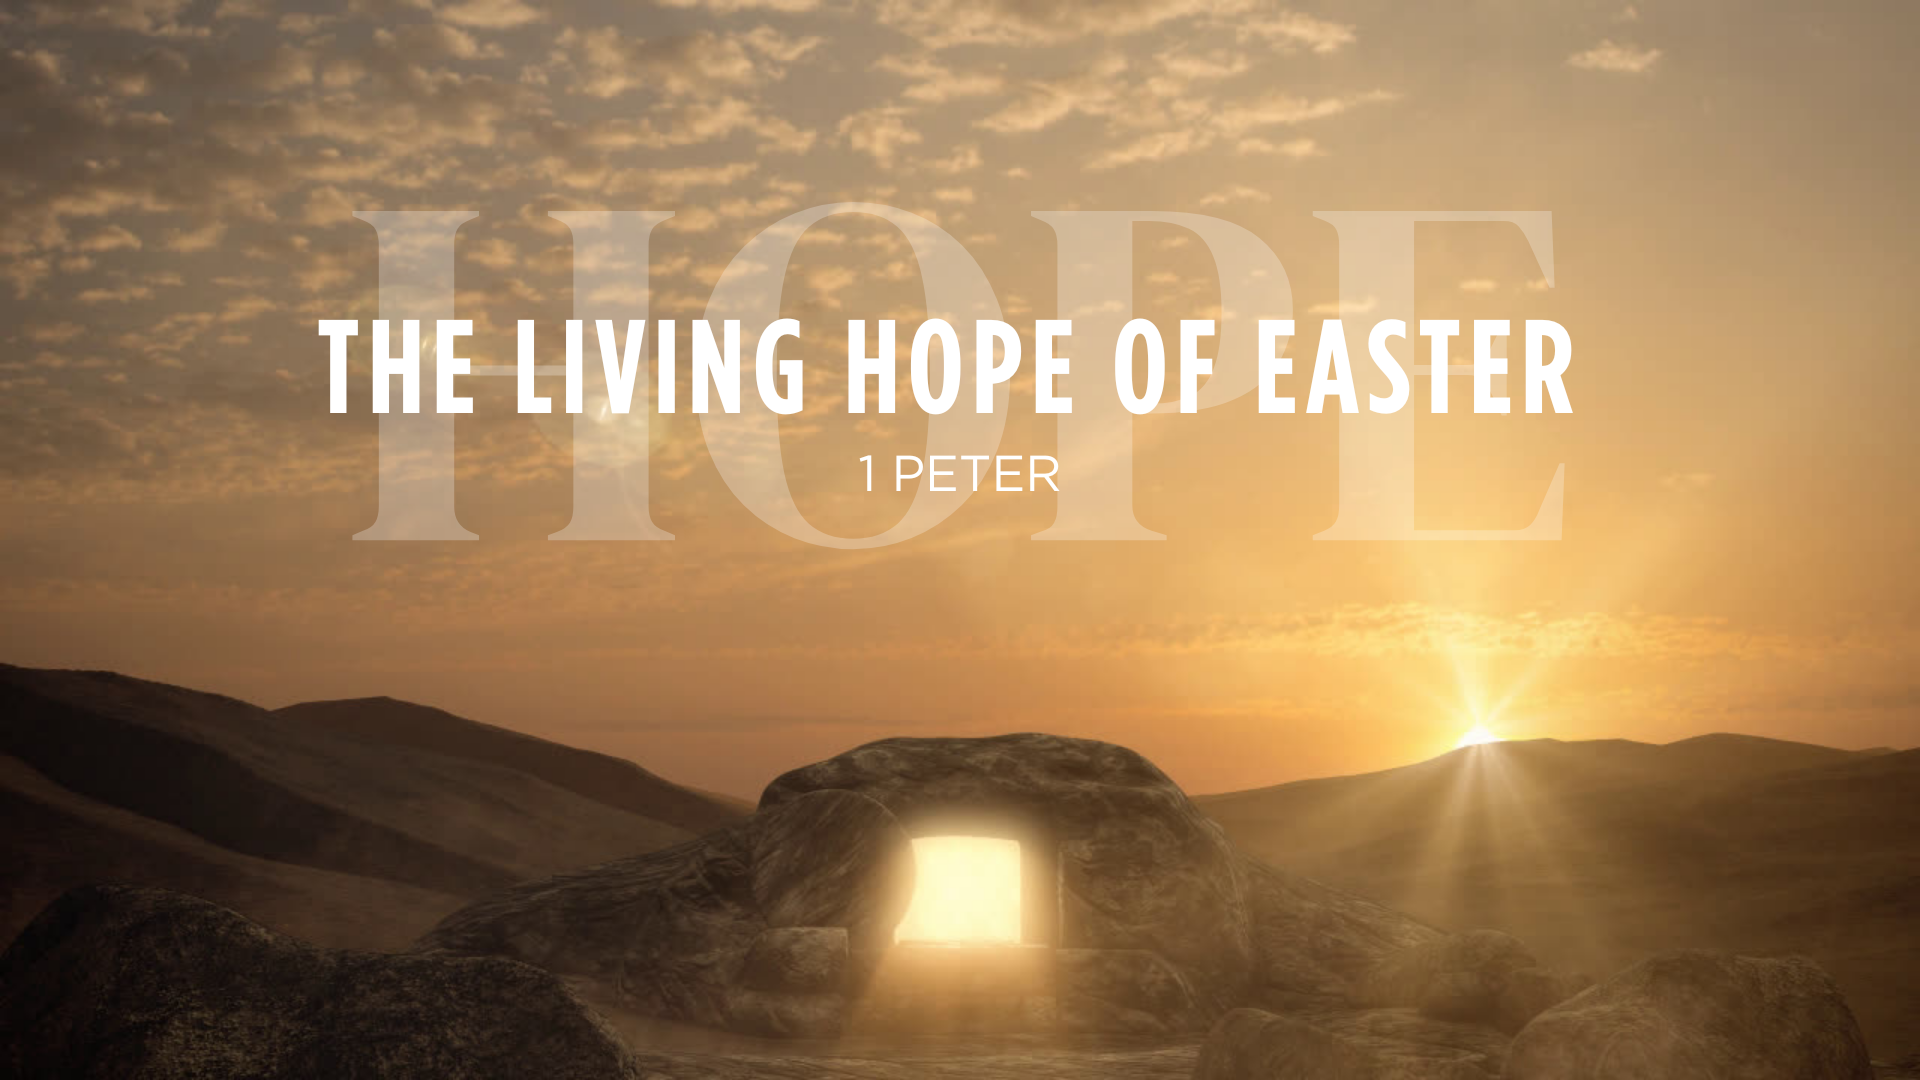 The Living Hope of Easter